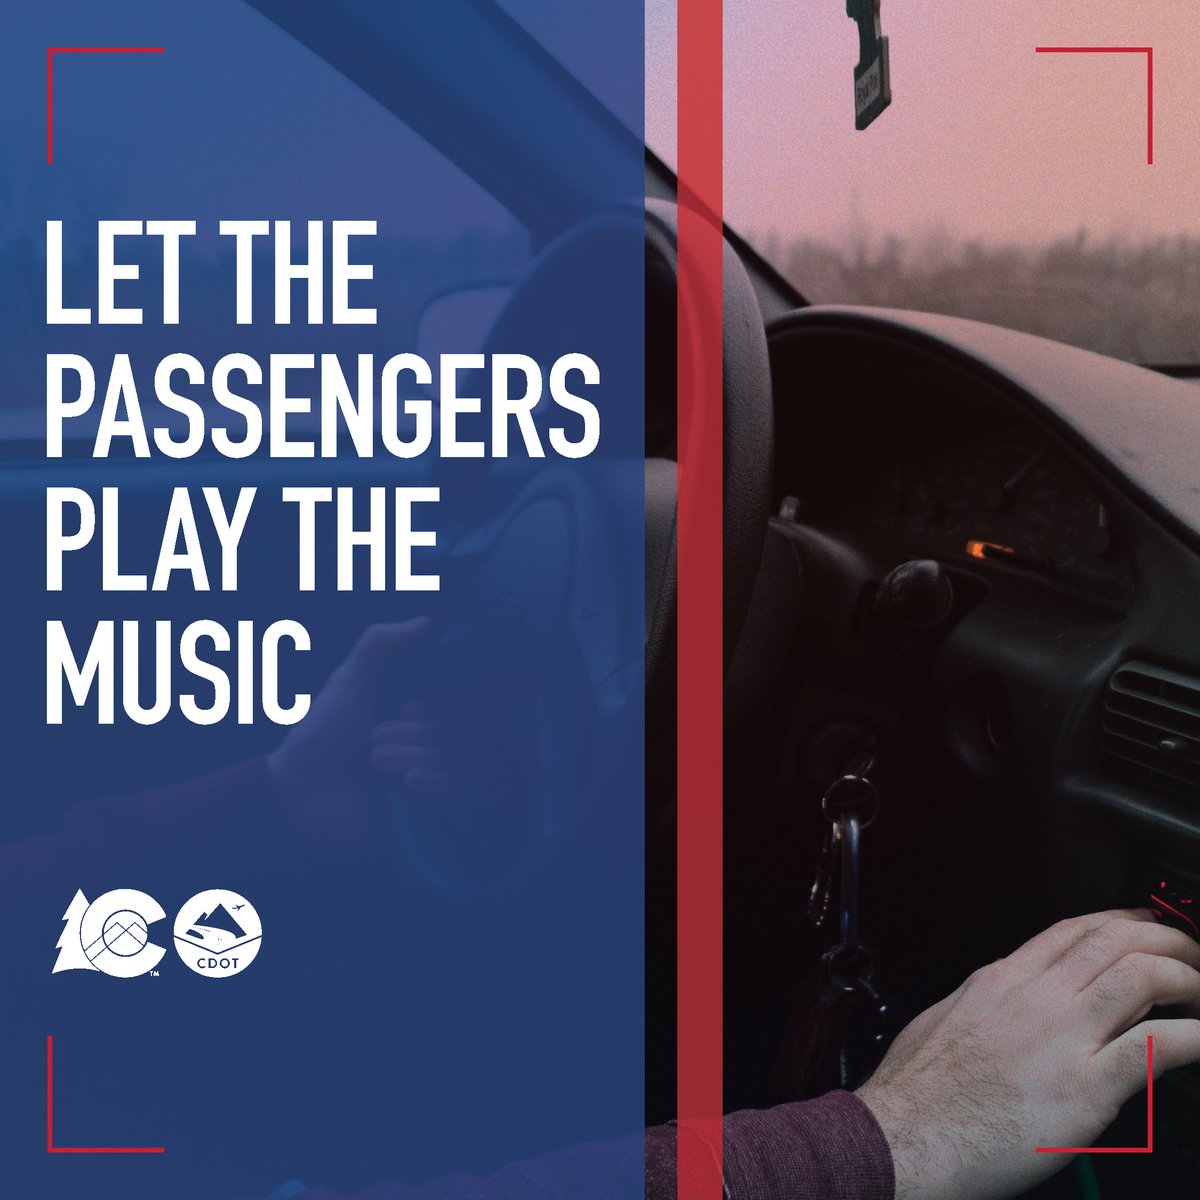 #DropTheDistraction and let the passengers set the tunes. Sitting through one bad song is better than what could happen when you take your eyes off the road. 

Get behind the wheel and #JustDrive. Visit distracted.codot.gov to learn more.